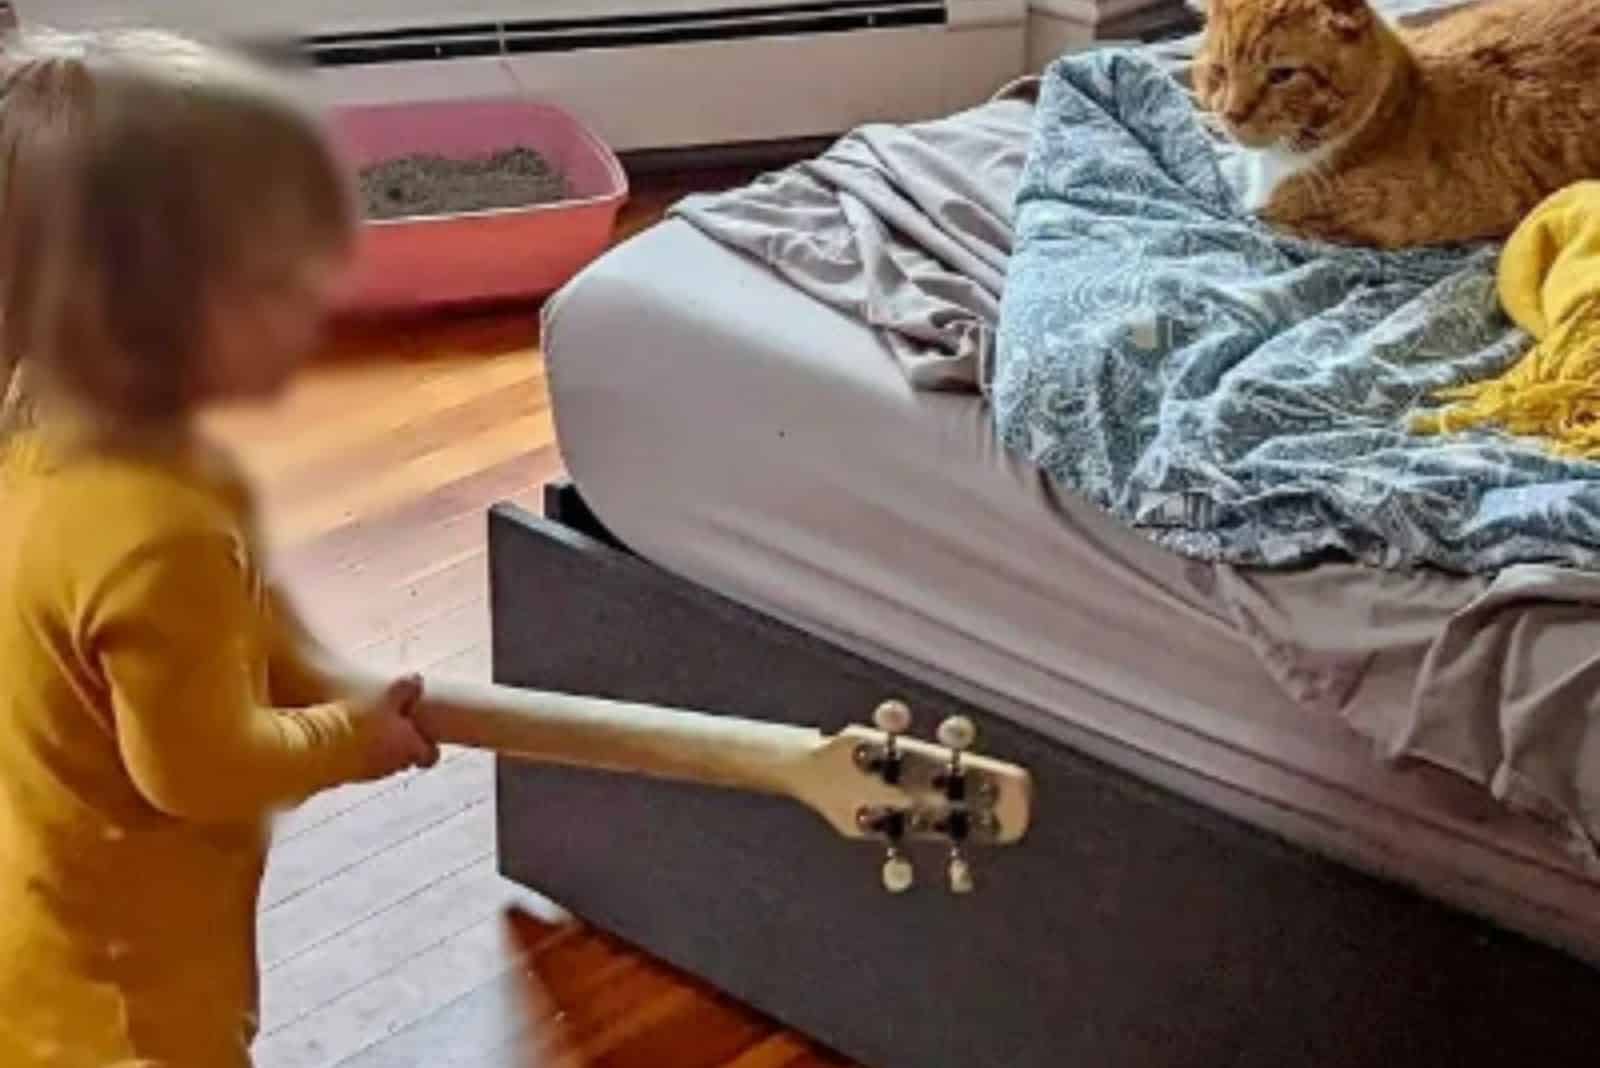 the child entertains the cat while lying on the bed